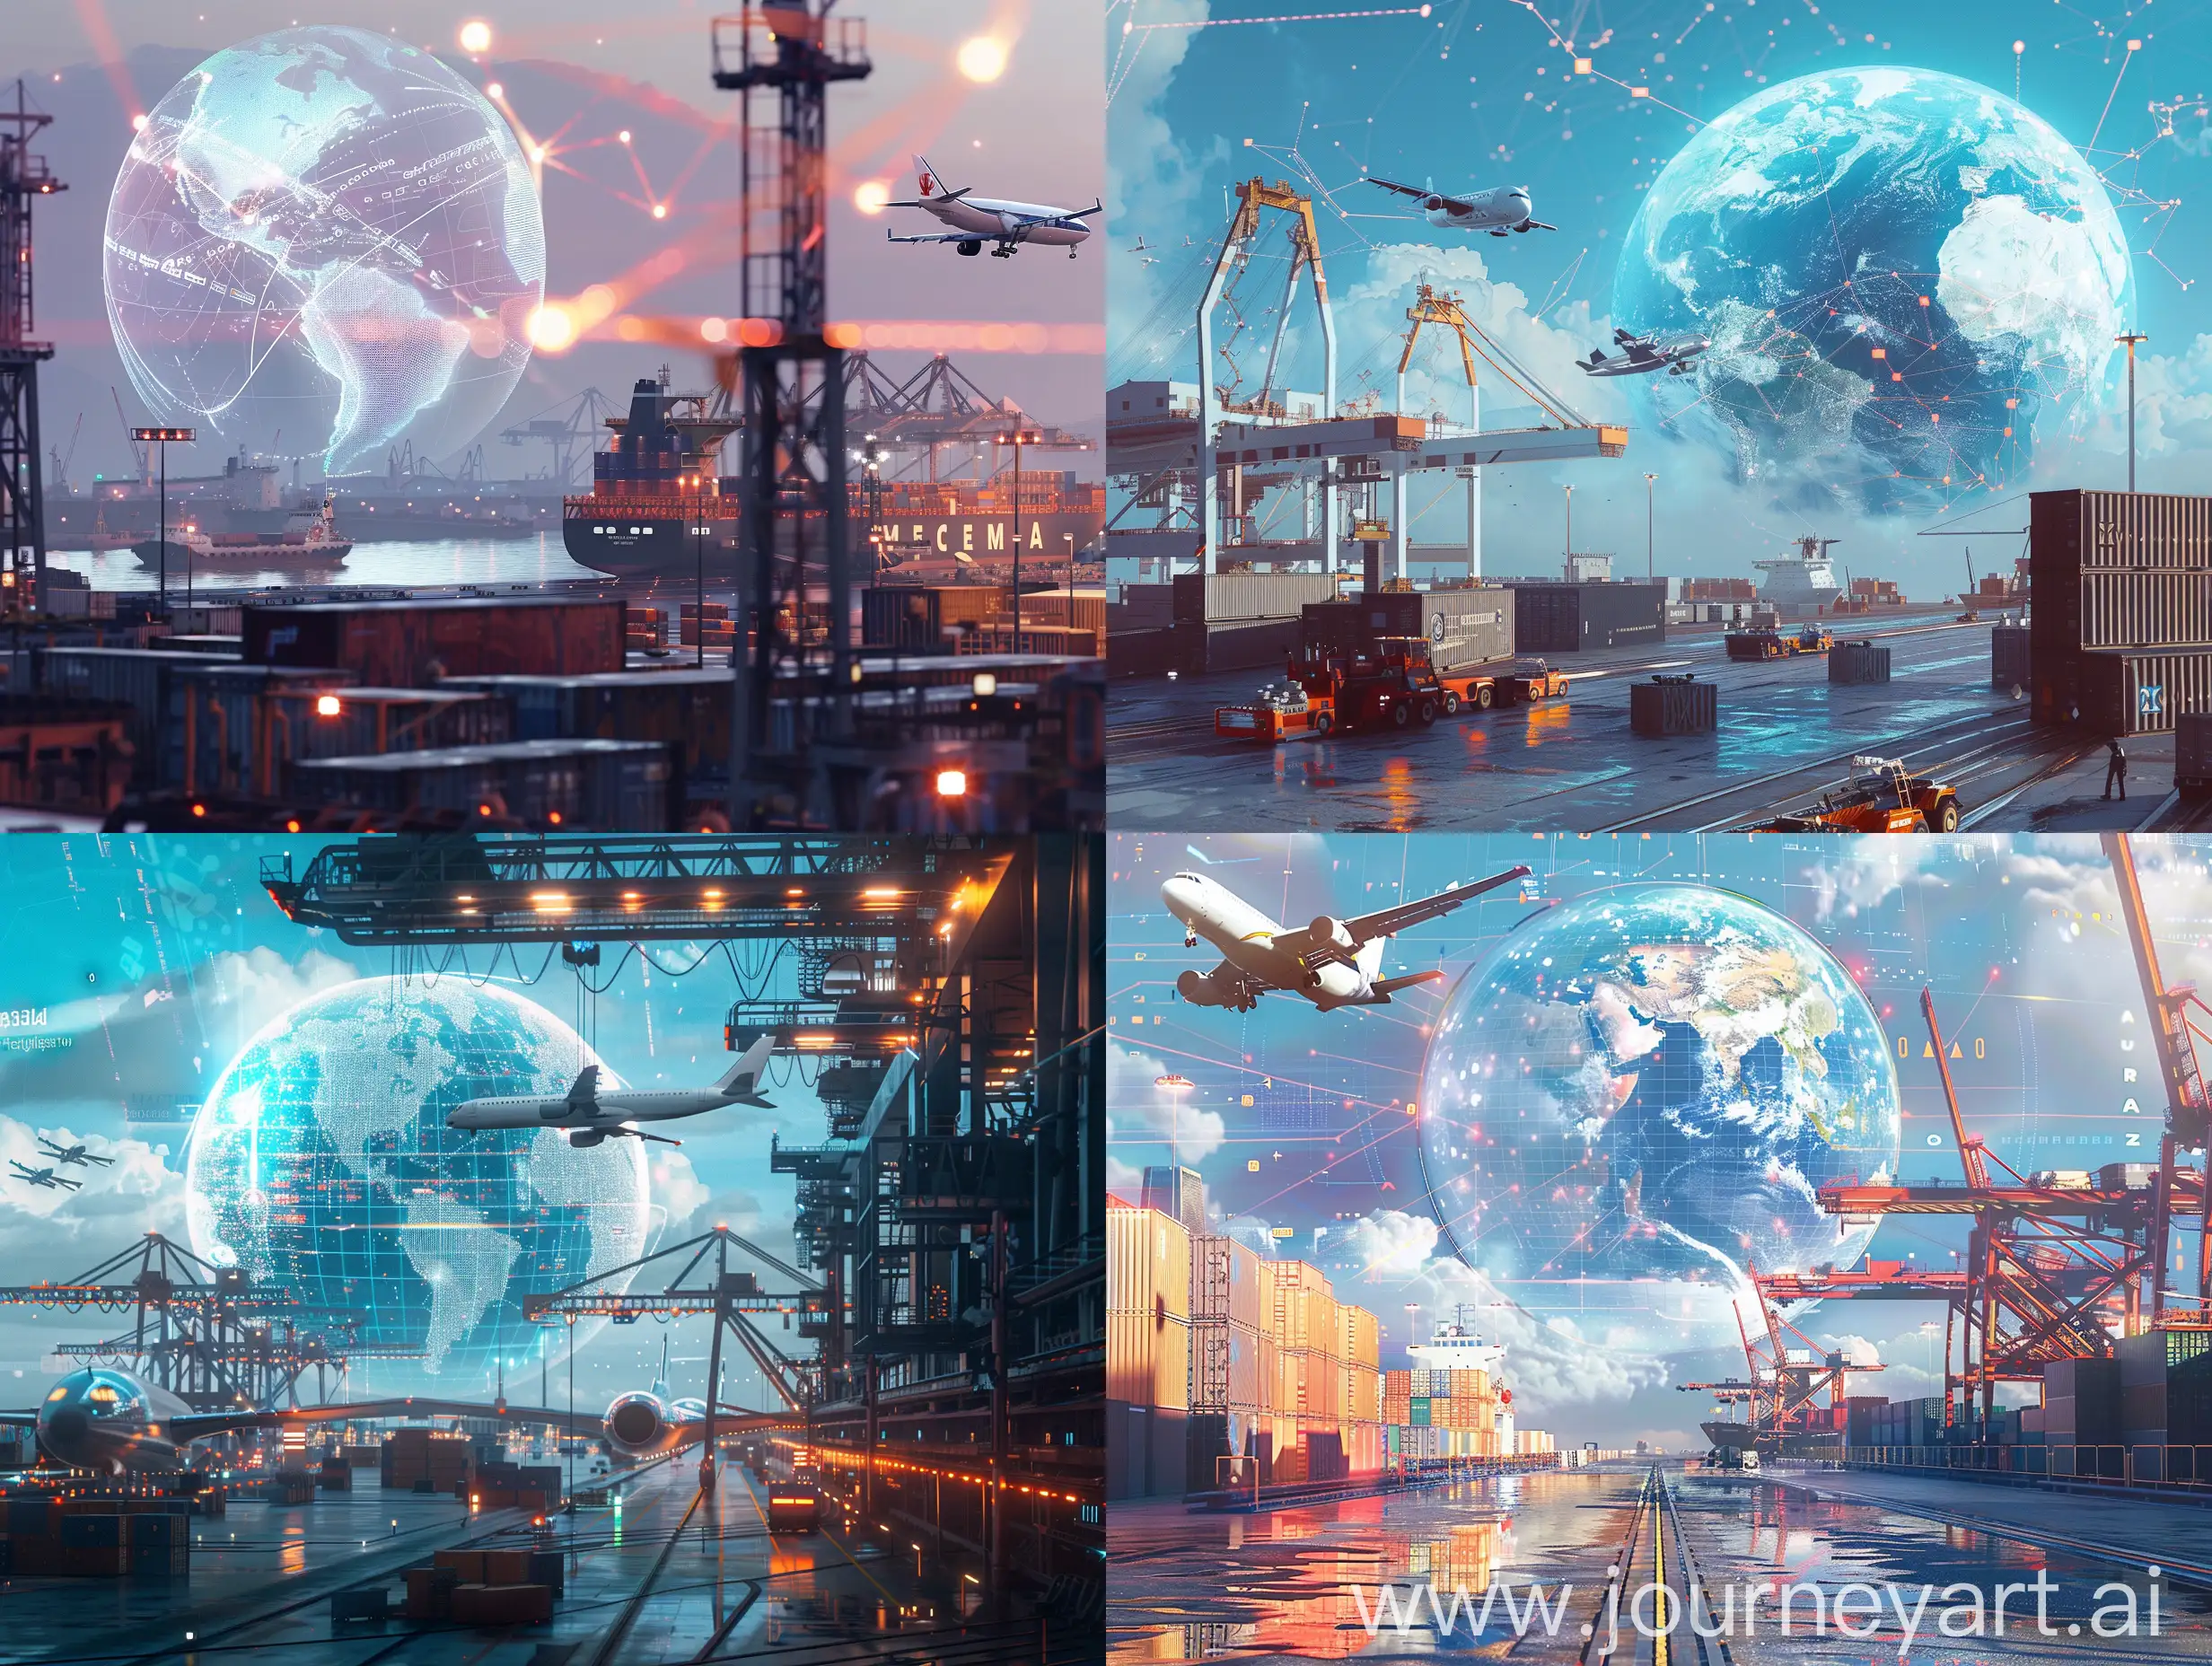 an ultra-realistic port scence with a big globe hologram with connecting trade lines in the background, big white airplane flying, cargo ship at the port along with port equipment and containers. make everything blend together.